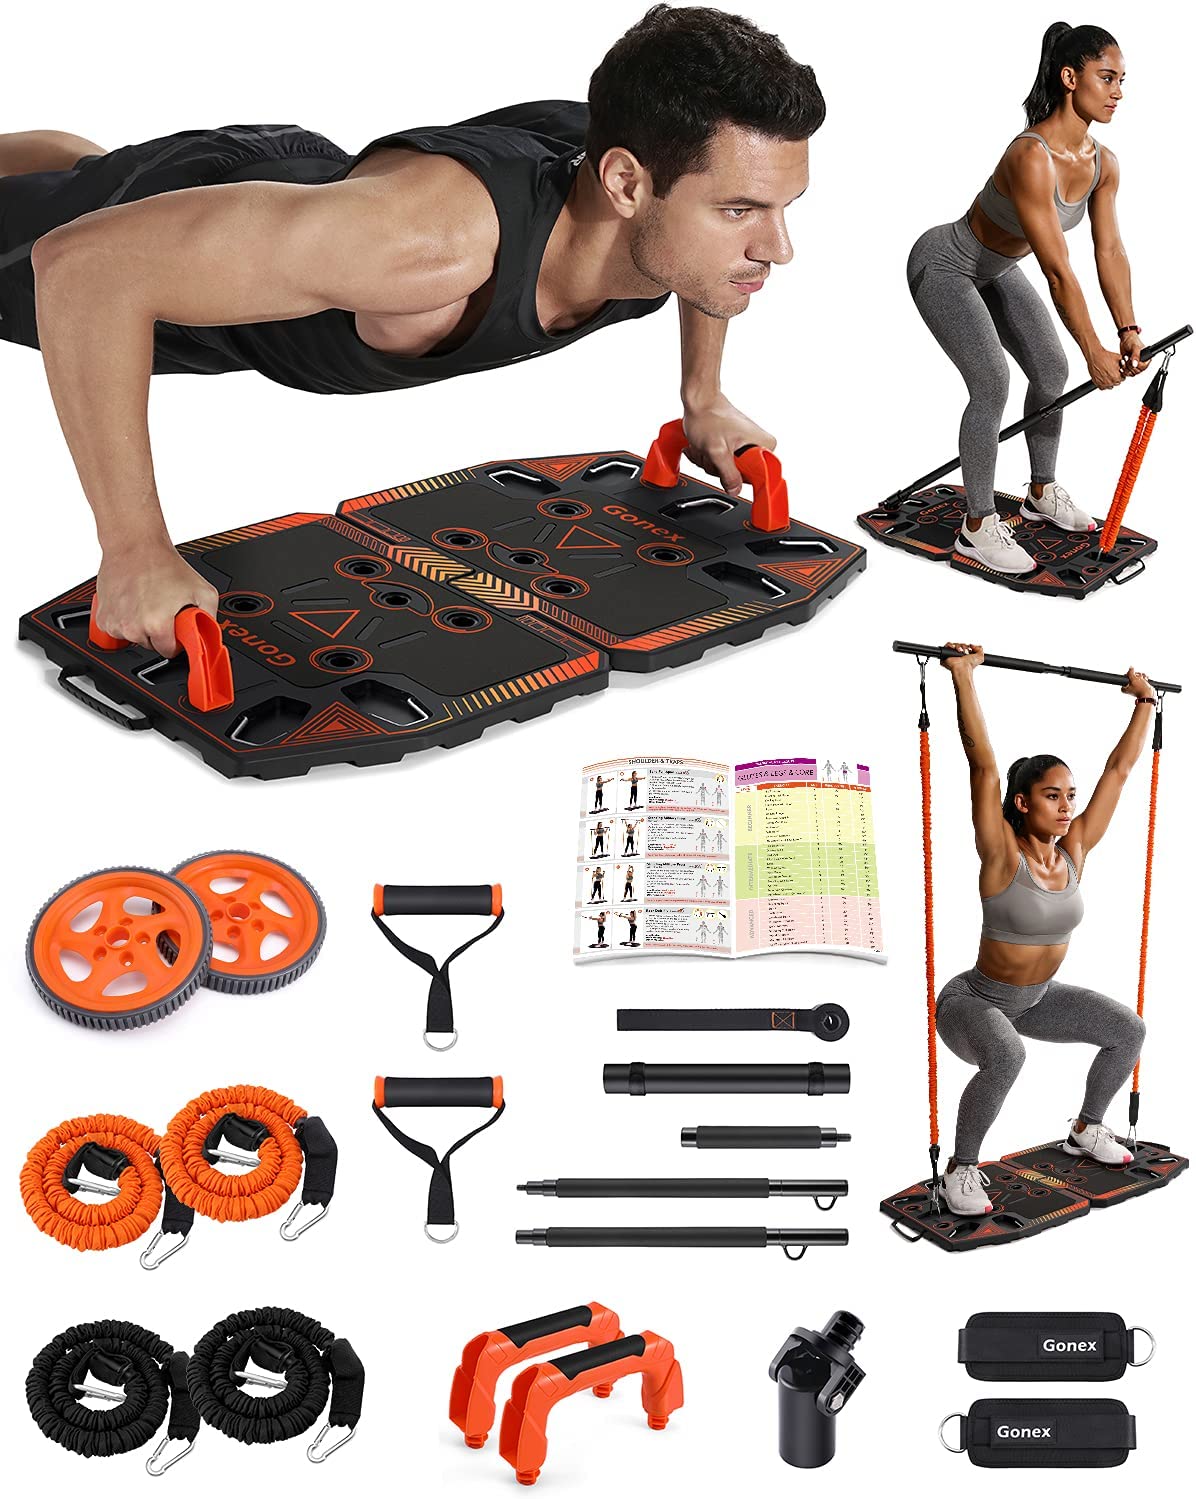 EVO Gym - Best Portable All in One Home Strength Training